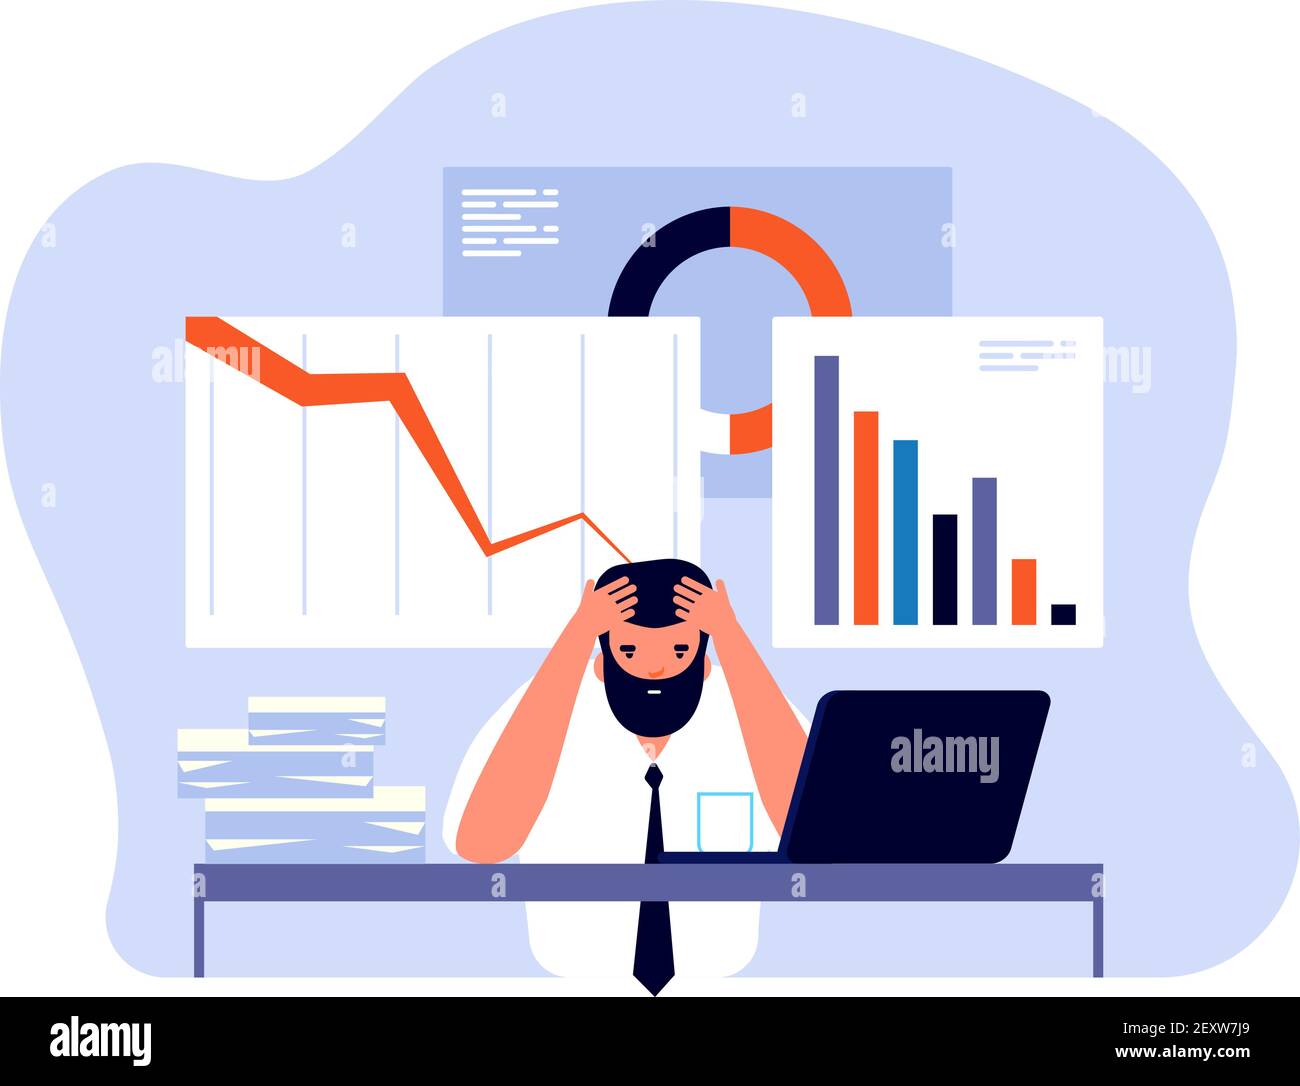 Financial crisis concept. Businessman in panic with falling trading charts. Failure and bankruptcy, economic risk vector background. Businessman crisis market, business chart and graph illustration Stock Vector